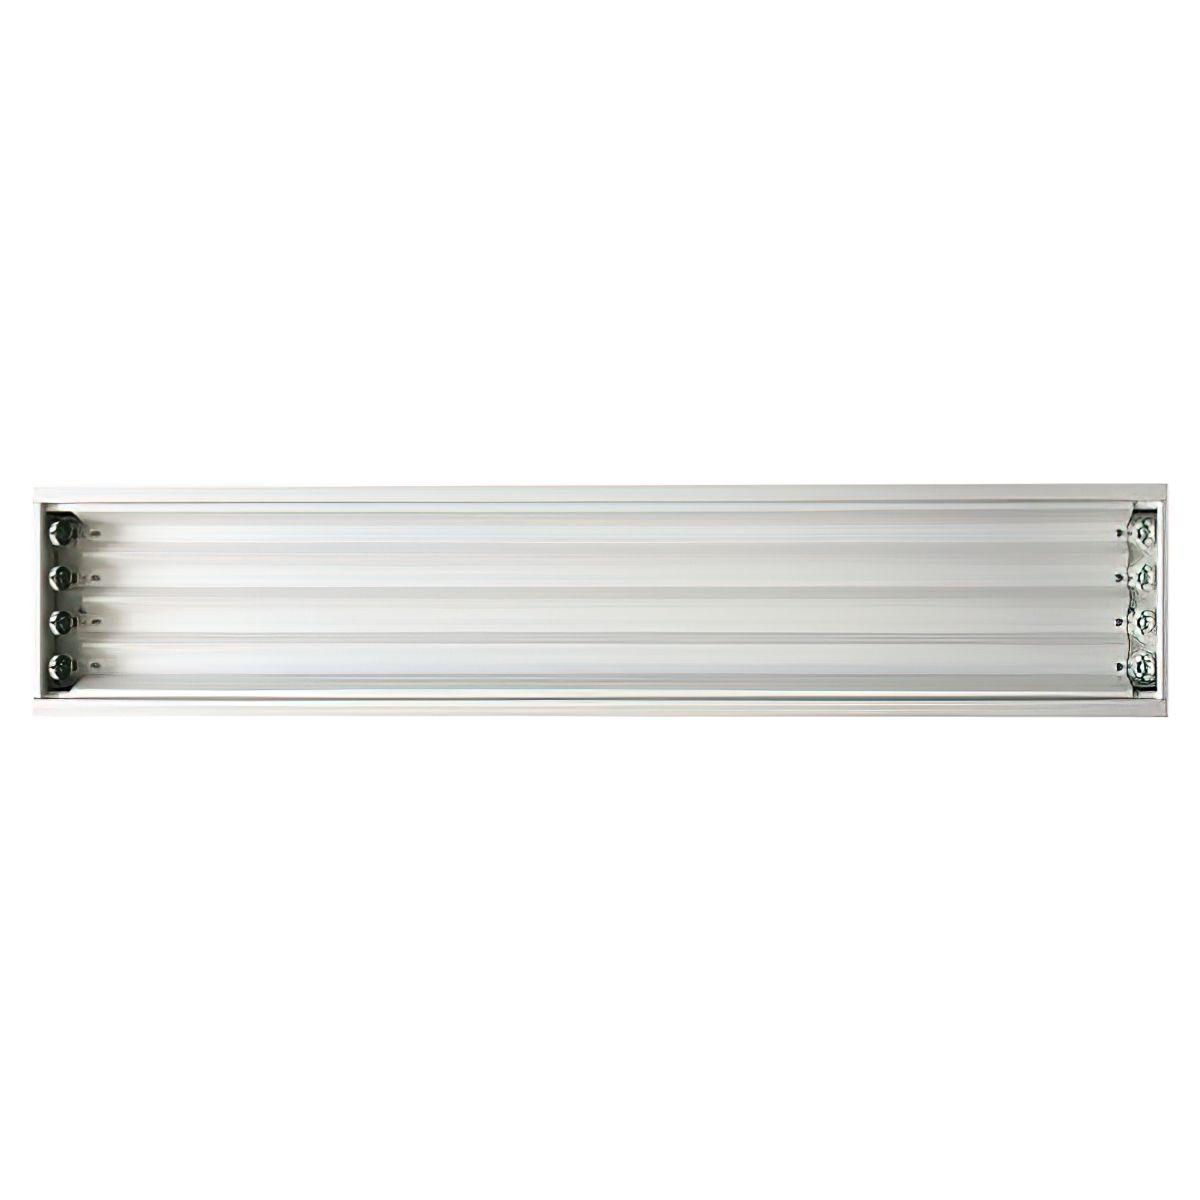 4ft LED Ready High Bay, 4 lamp Double End Wiring, T8 Bulbs Not Included - Bees Lighting